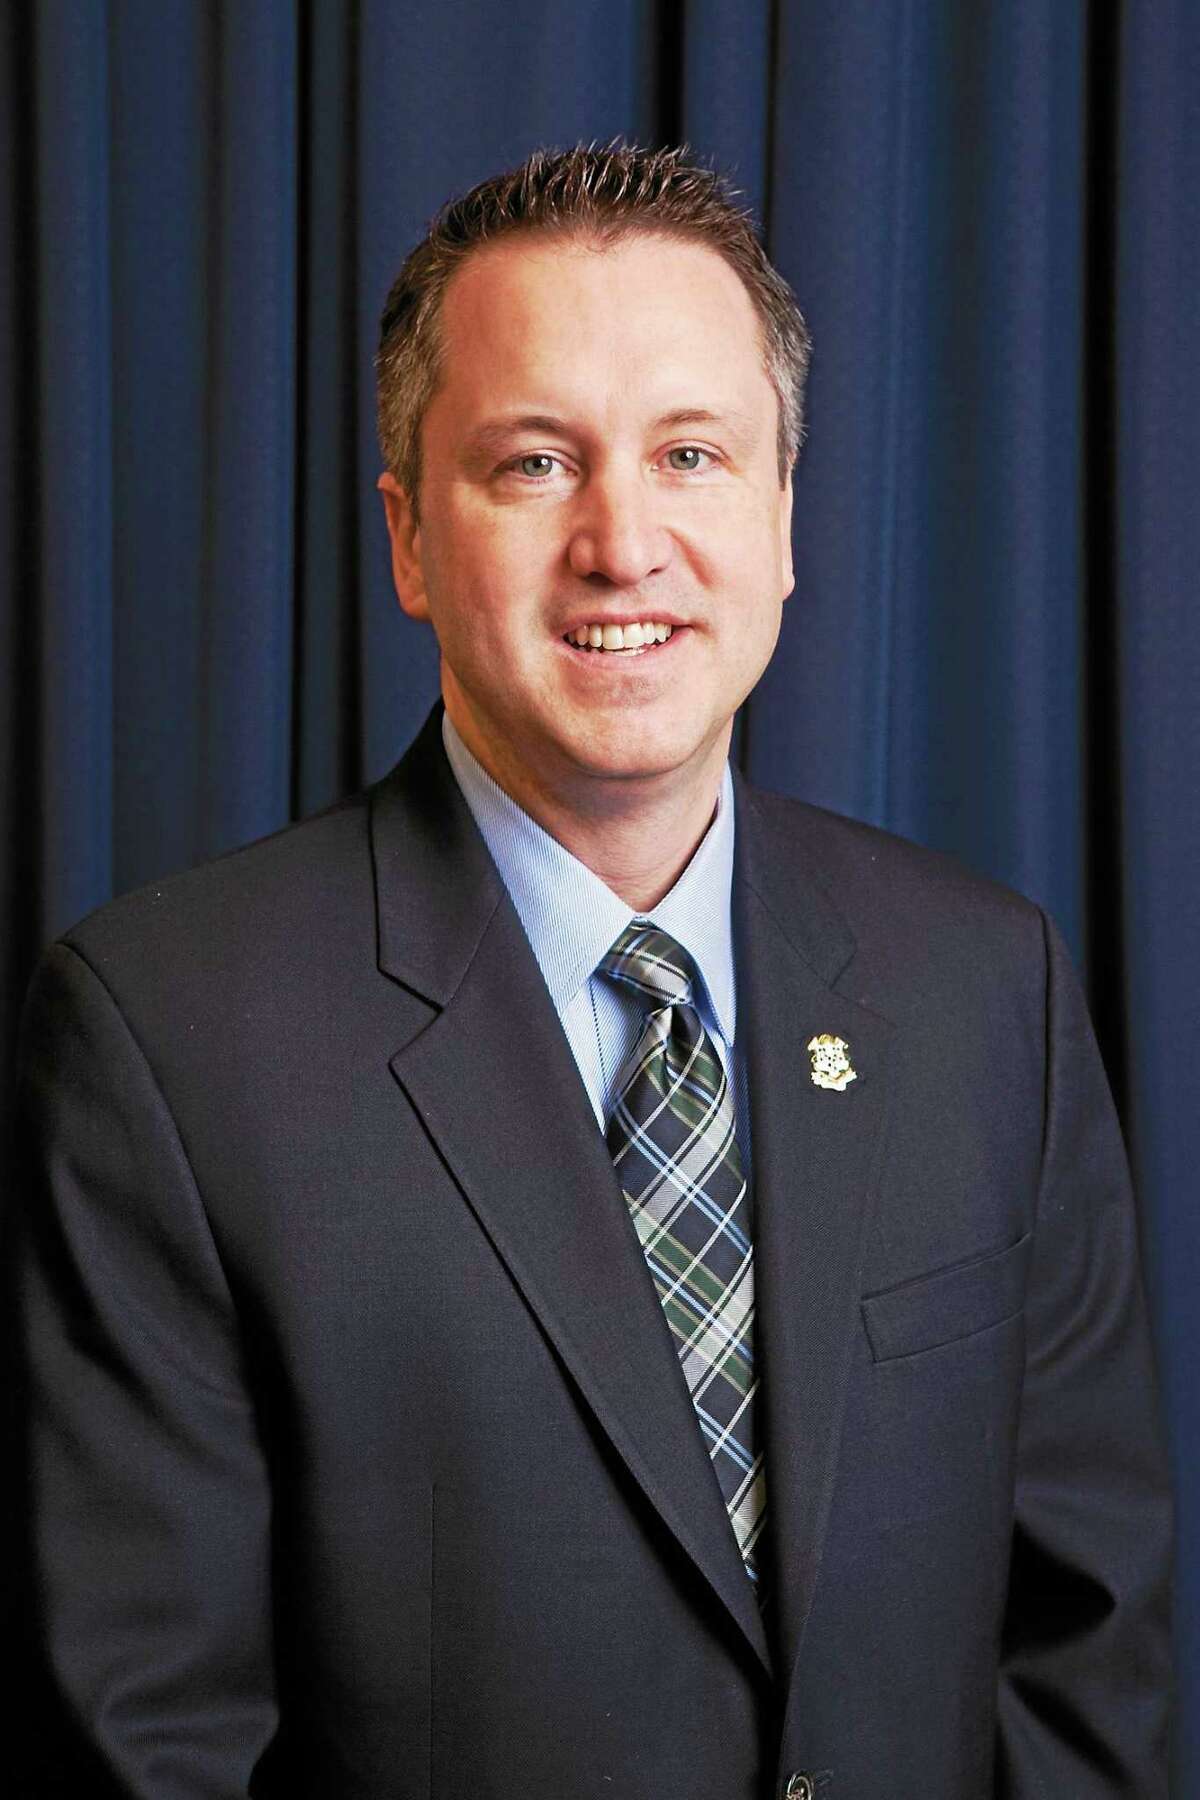 Sen. Rob Kane, R-Watertown, is ranking member of the state Appropriations Committee.